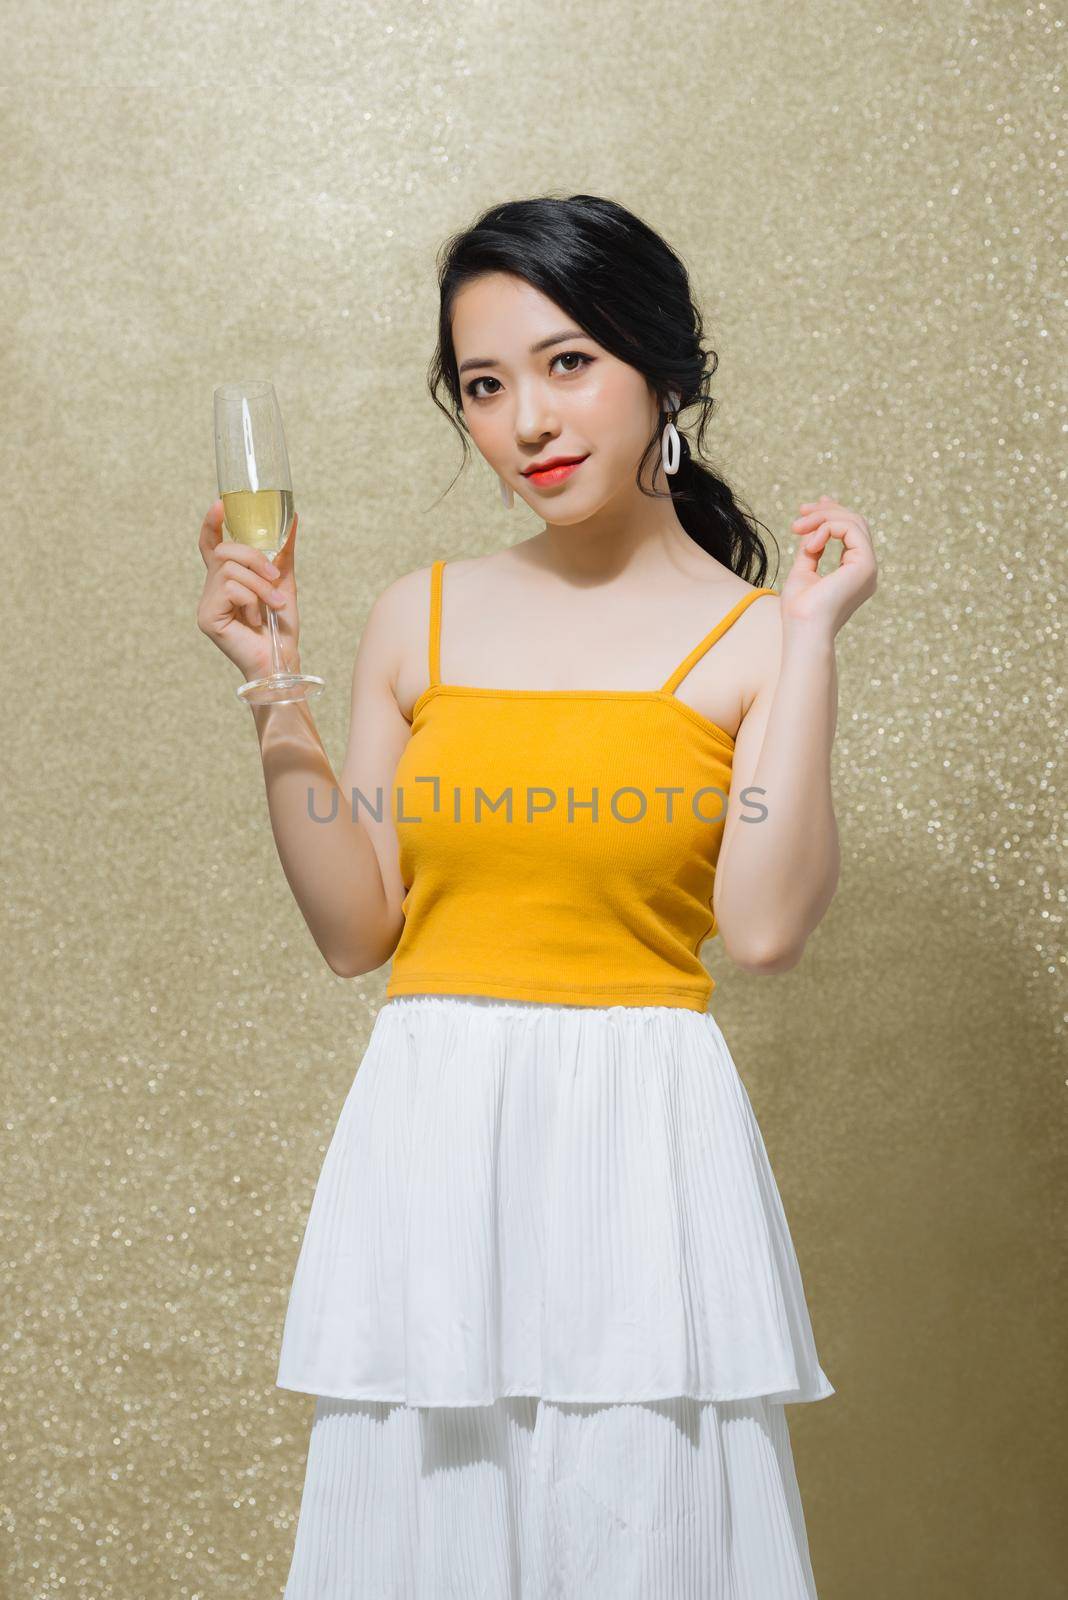 Portrait of beautiful young Asian woman holding wine glass over gold background. Celebrating concept. by makidotvn